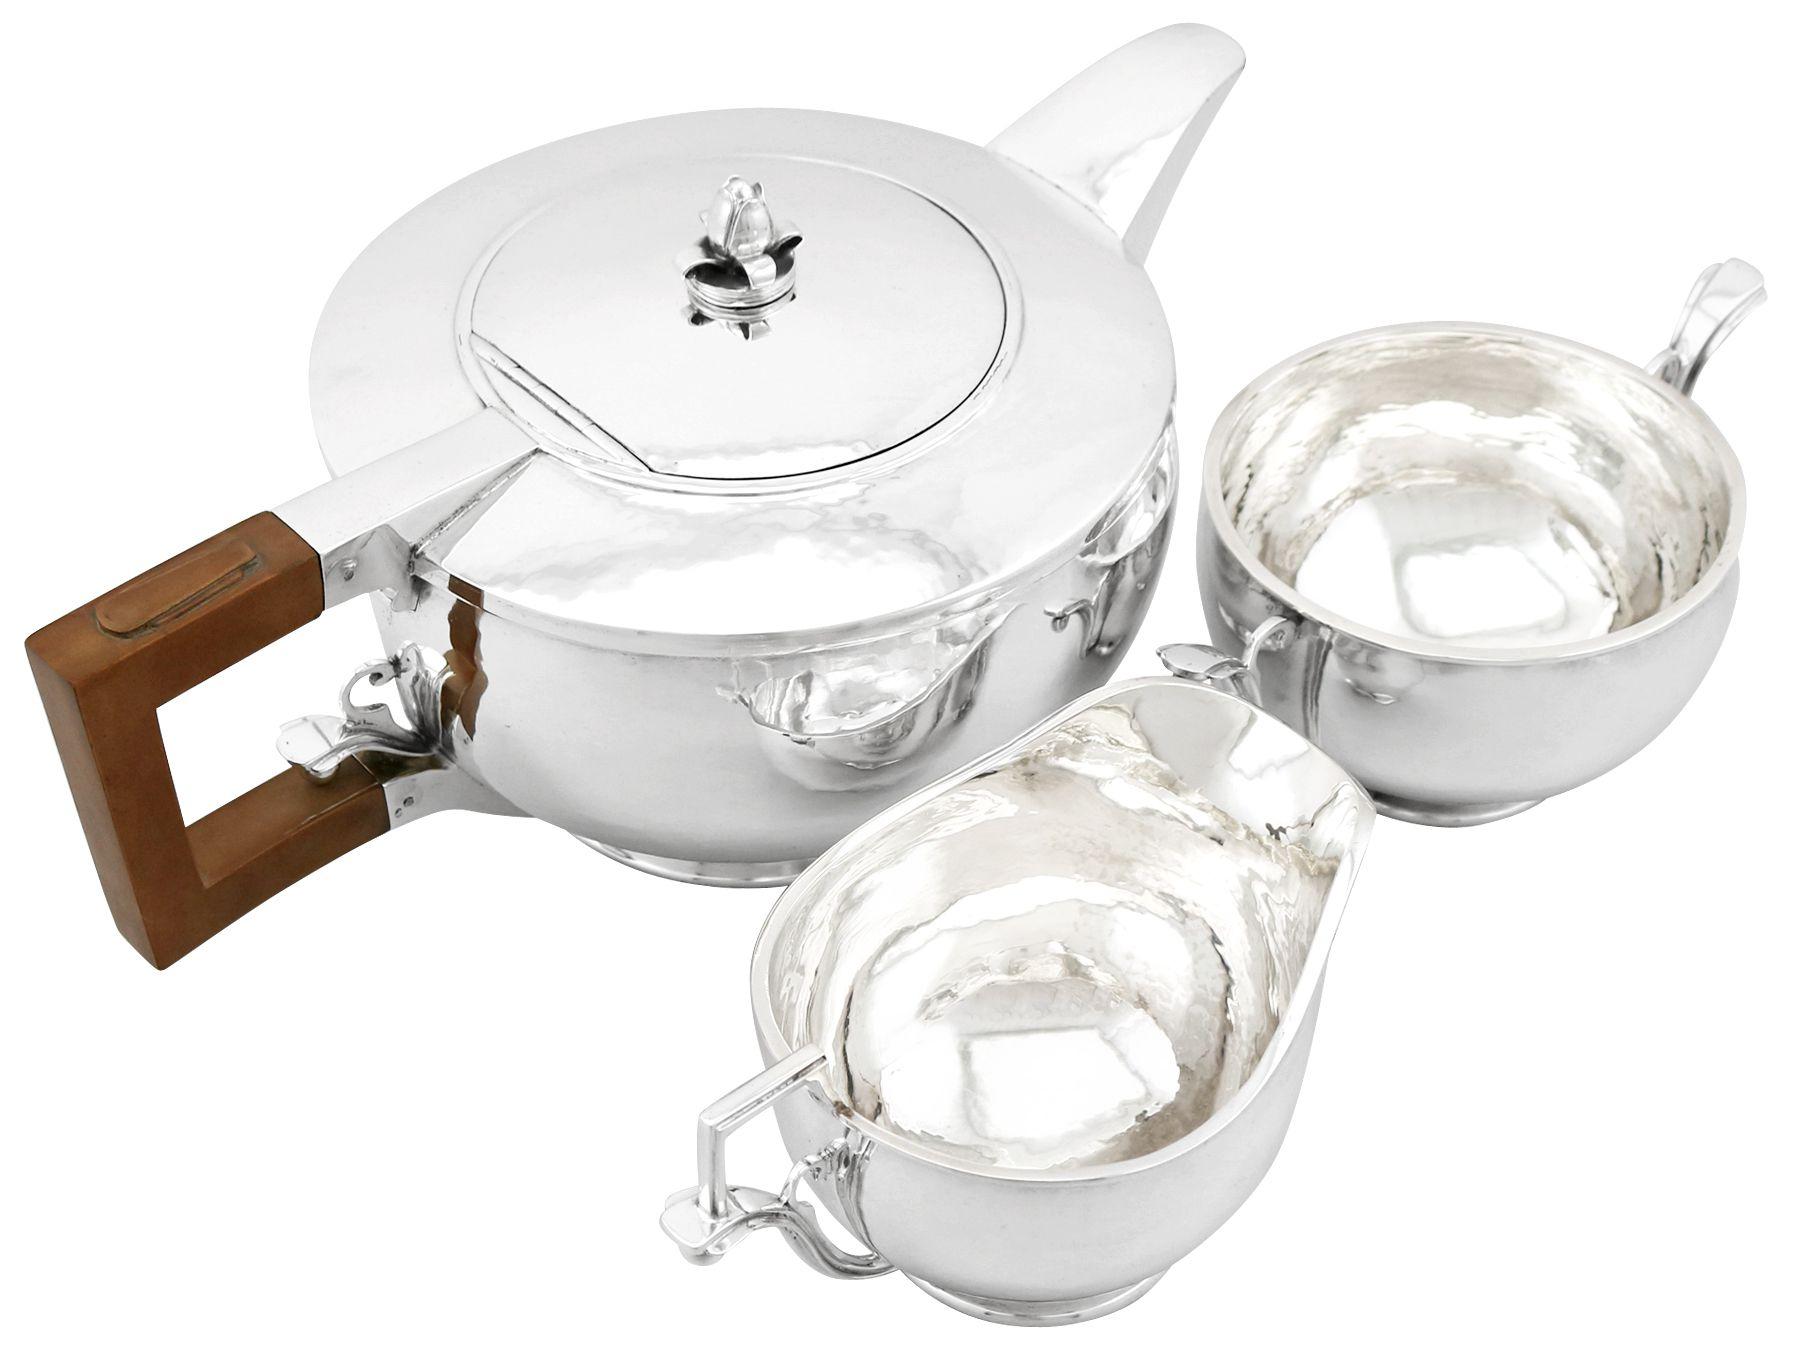 An exceptional, fine and impressive antique George V English sterling silver three-piece tea service/set made in the Arts & Crafts style; an addition to our silver teaware collection

This exceptional antique George V sterling silver three piece